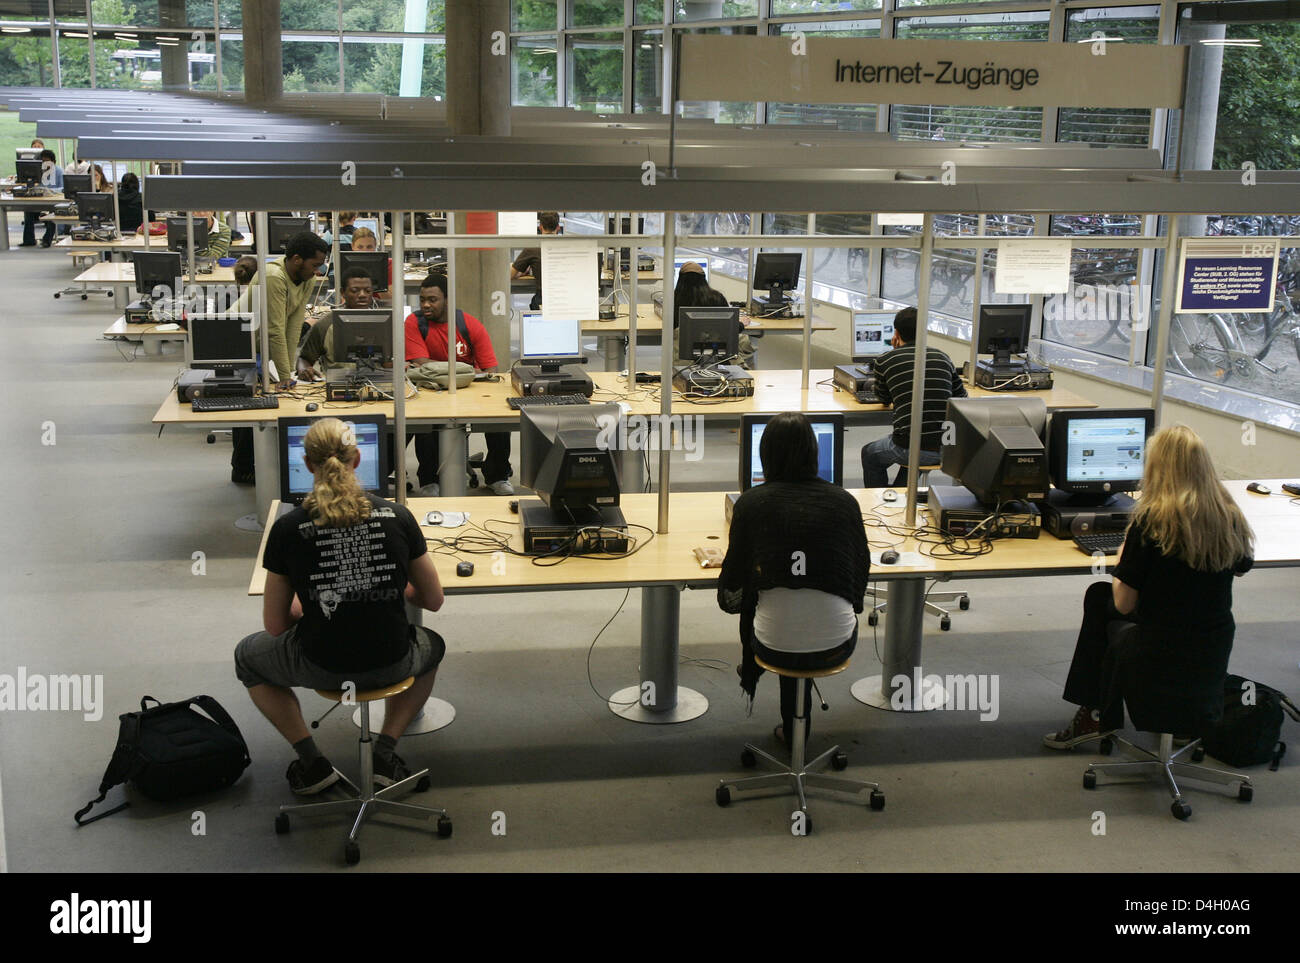 Students study at 'Niedersaechsische Staats- und Universitaetsbibliothek' (literally: 'Lower Saxonian State and University Library'), 'Georg-August' University in Goettingen, Germany, 16 July 2008. Photo: Frank May Stock Photo